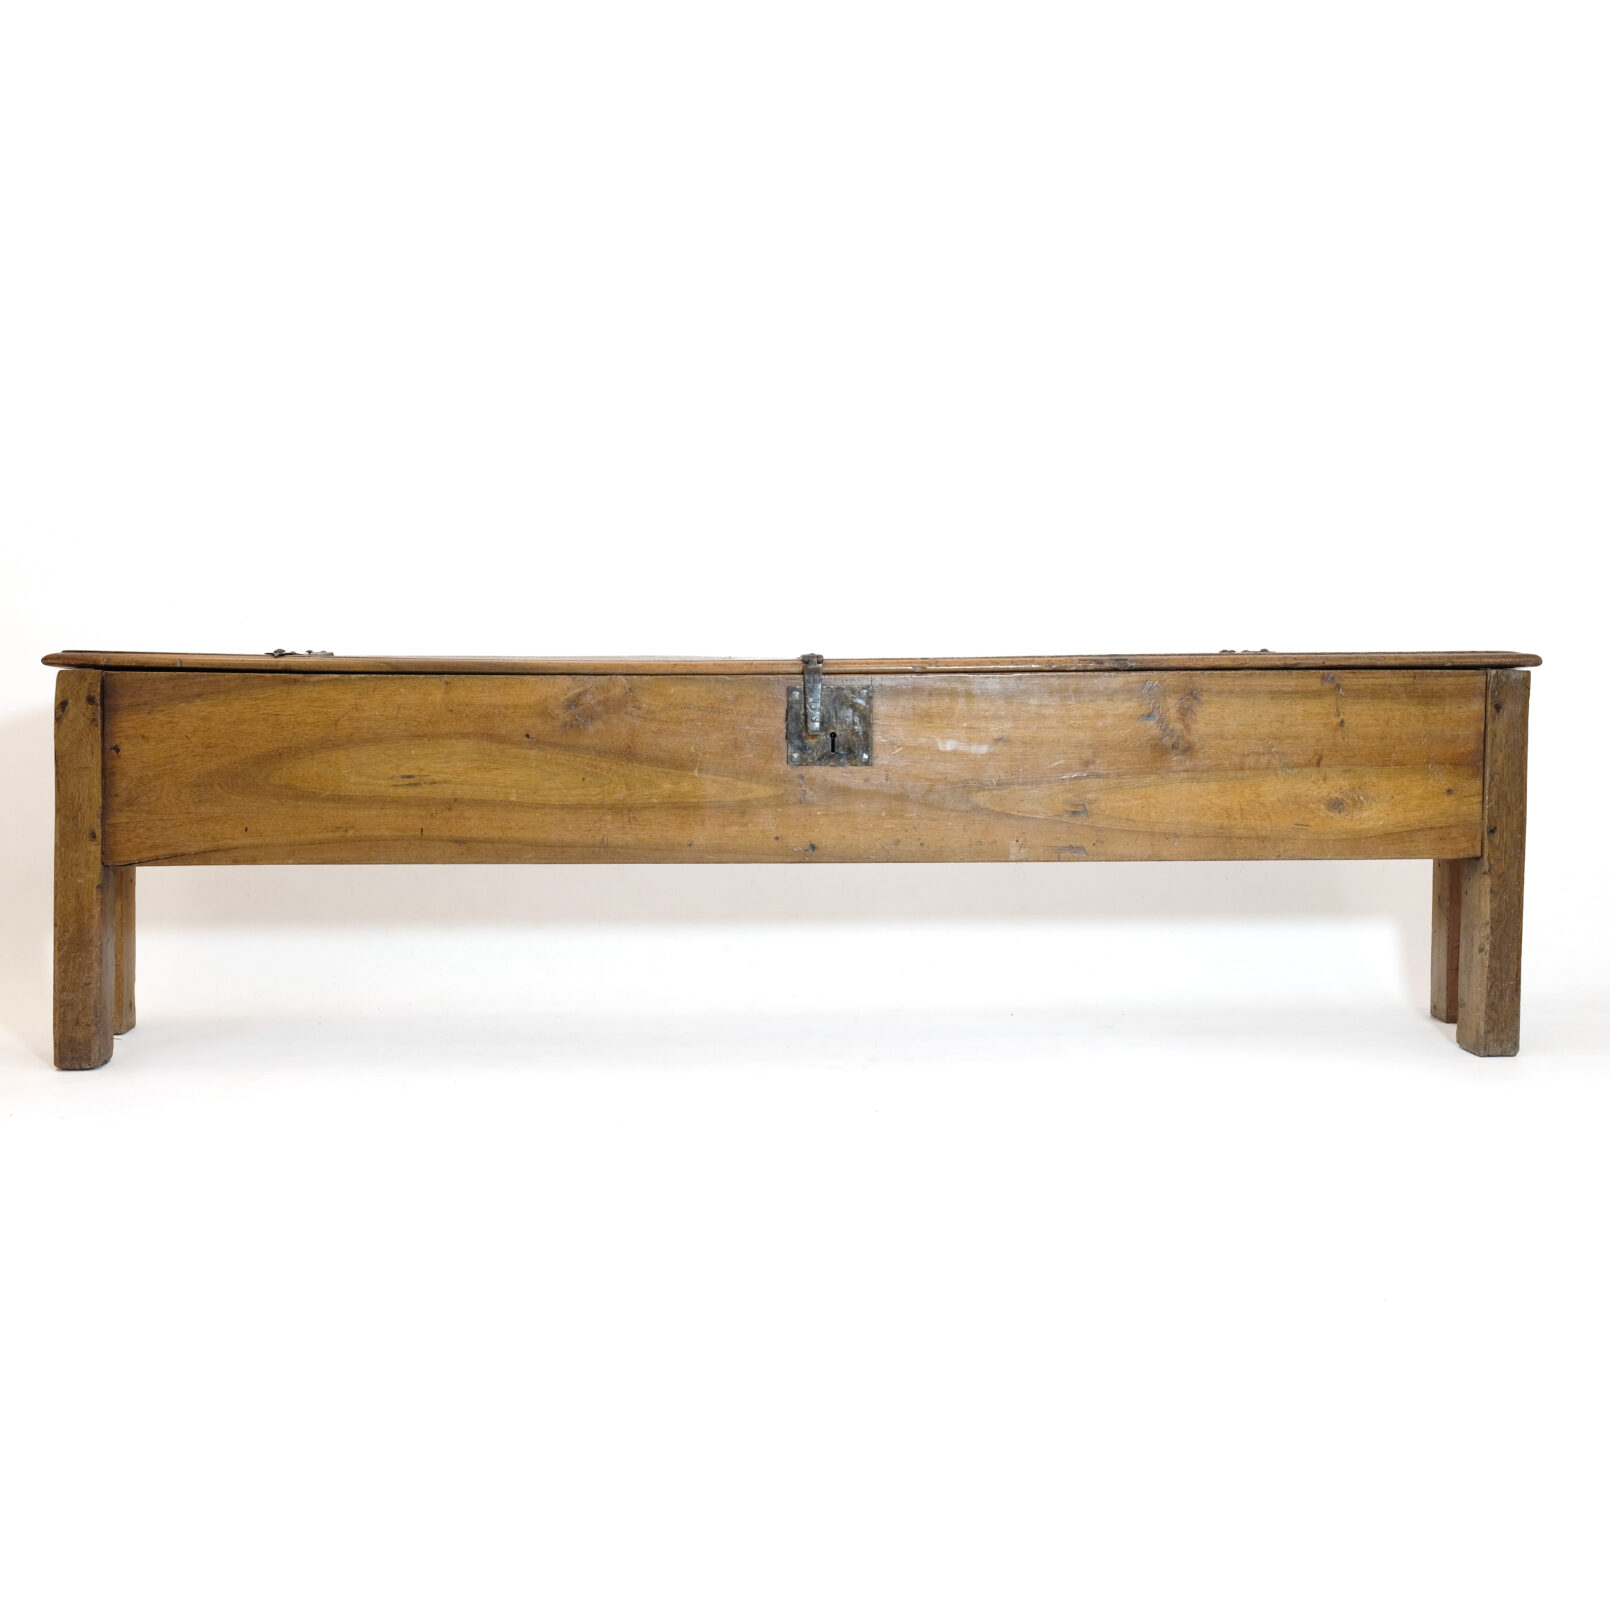 Large walnut grain chest forming a bench, 220cm.